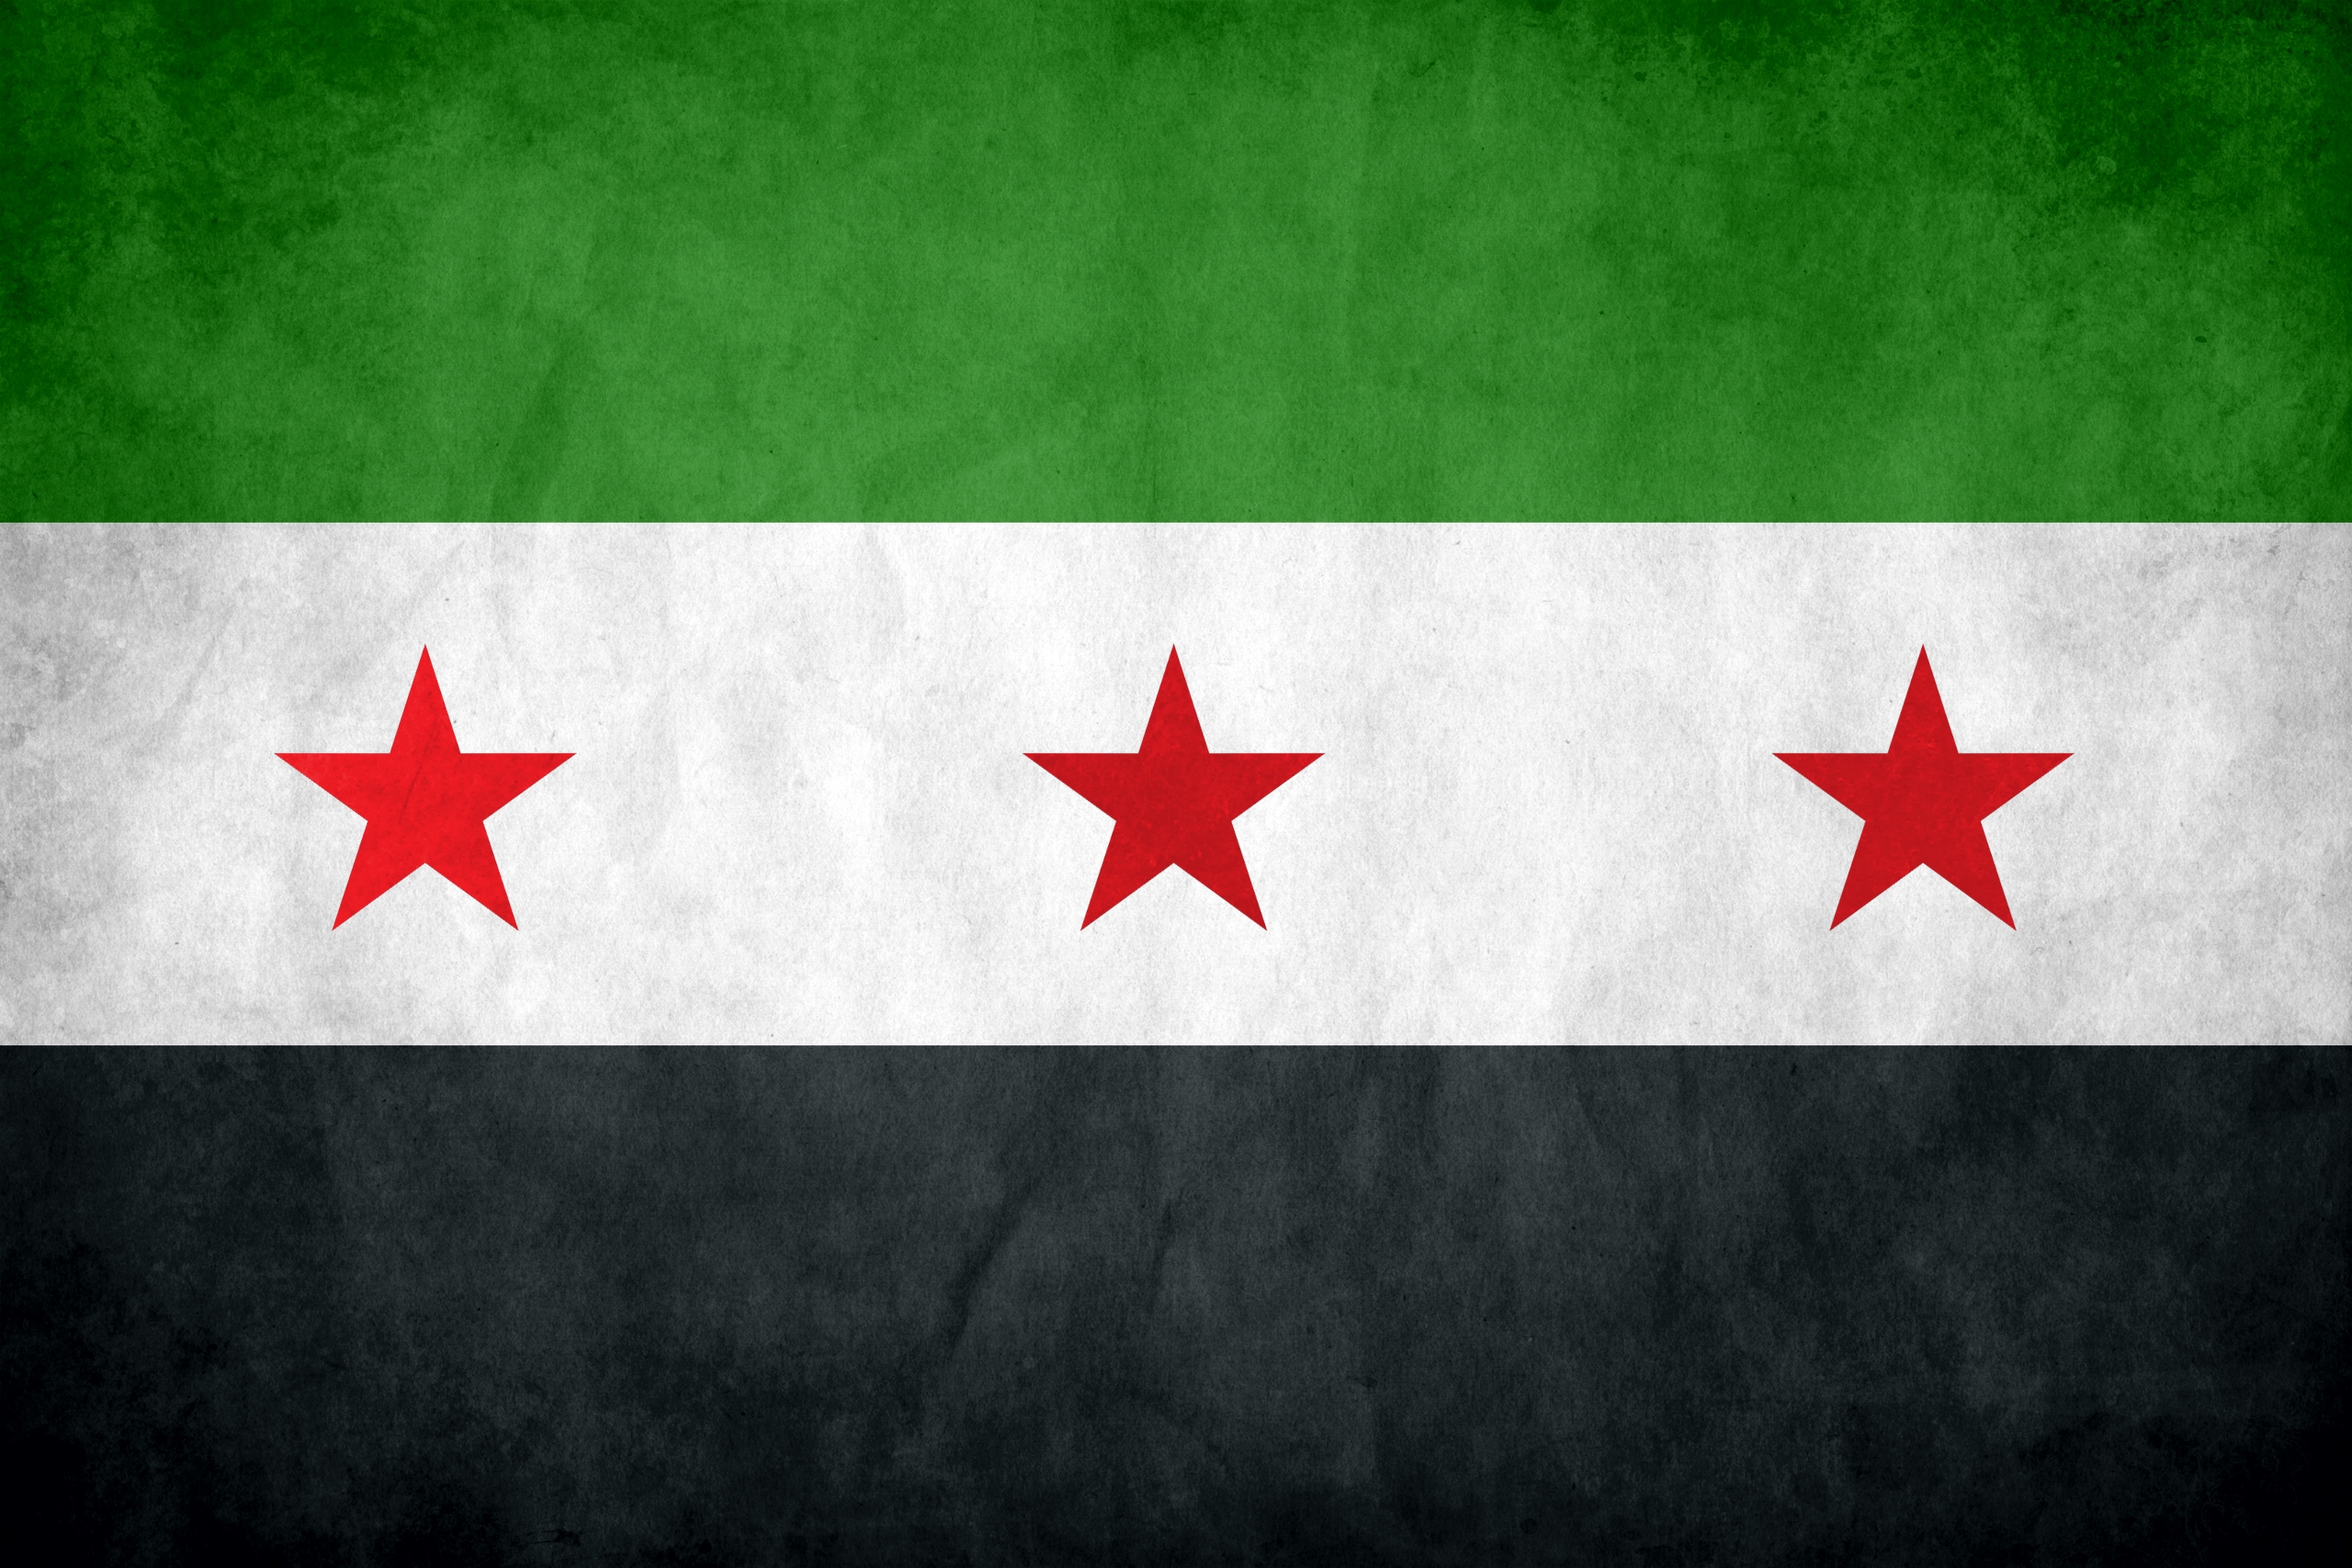 syria_flag_by_waheed6808-d4ngihd.jpg